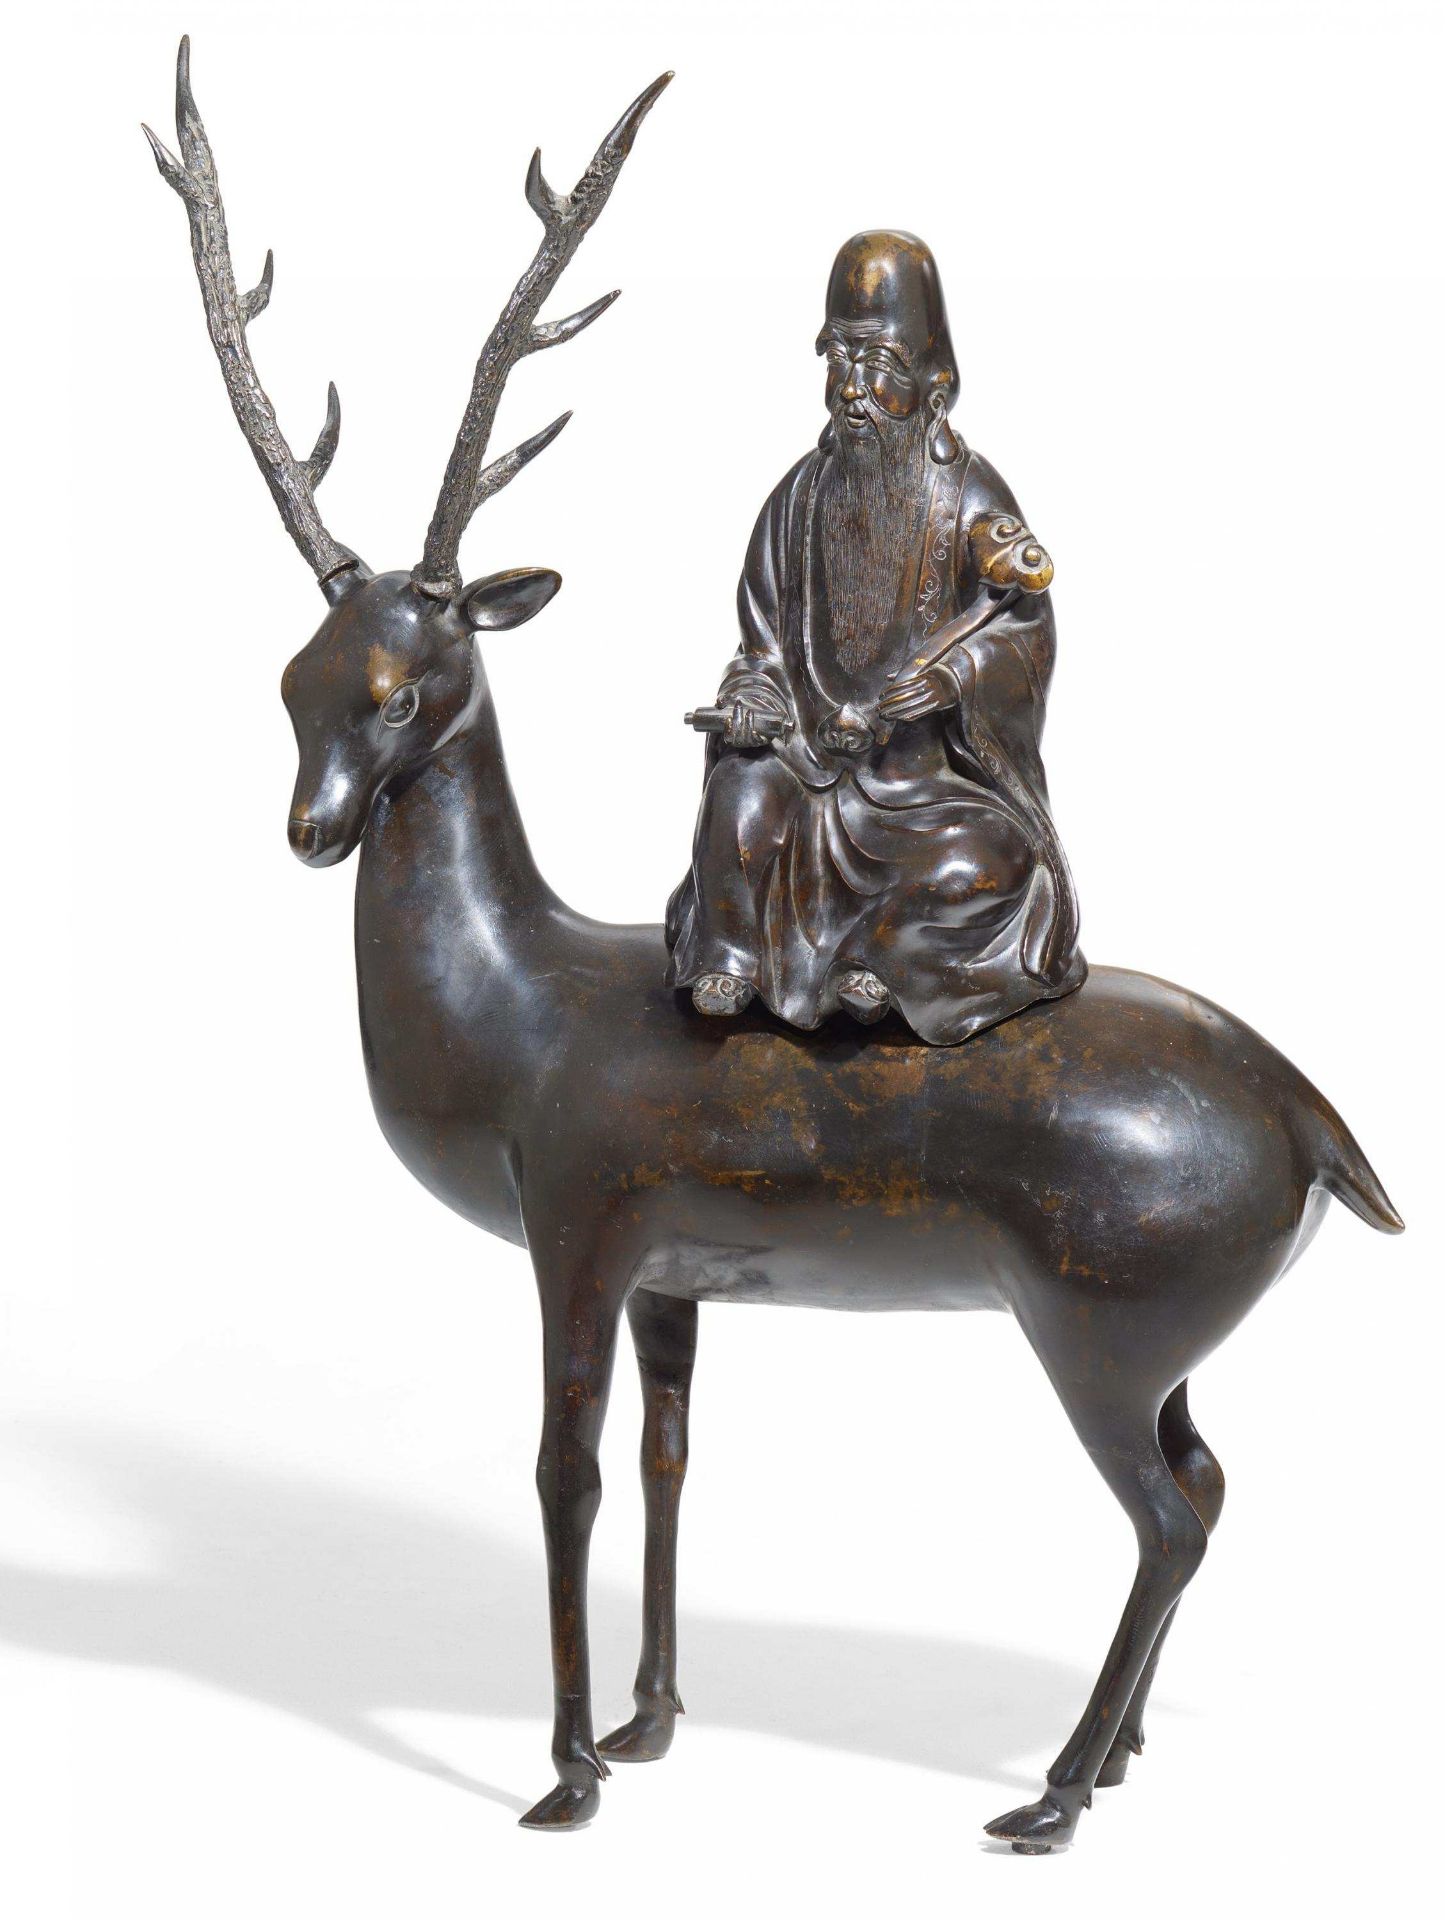 SHOULAO SITTING ON A DEER. China. 17th/18th c. Copper bronze with dark, shiny patina and residue